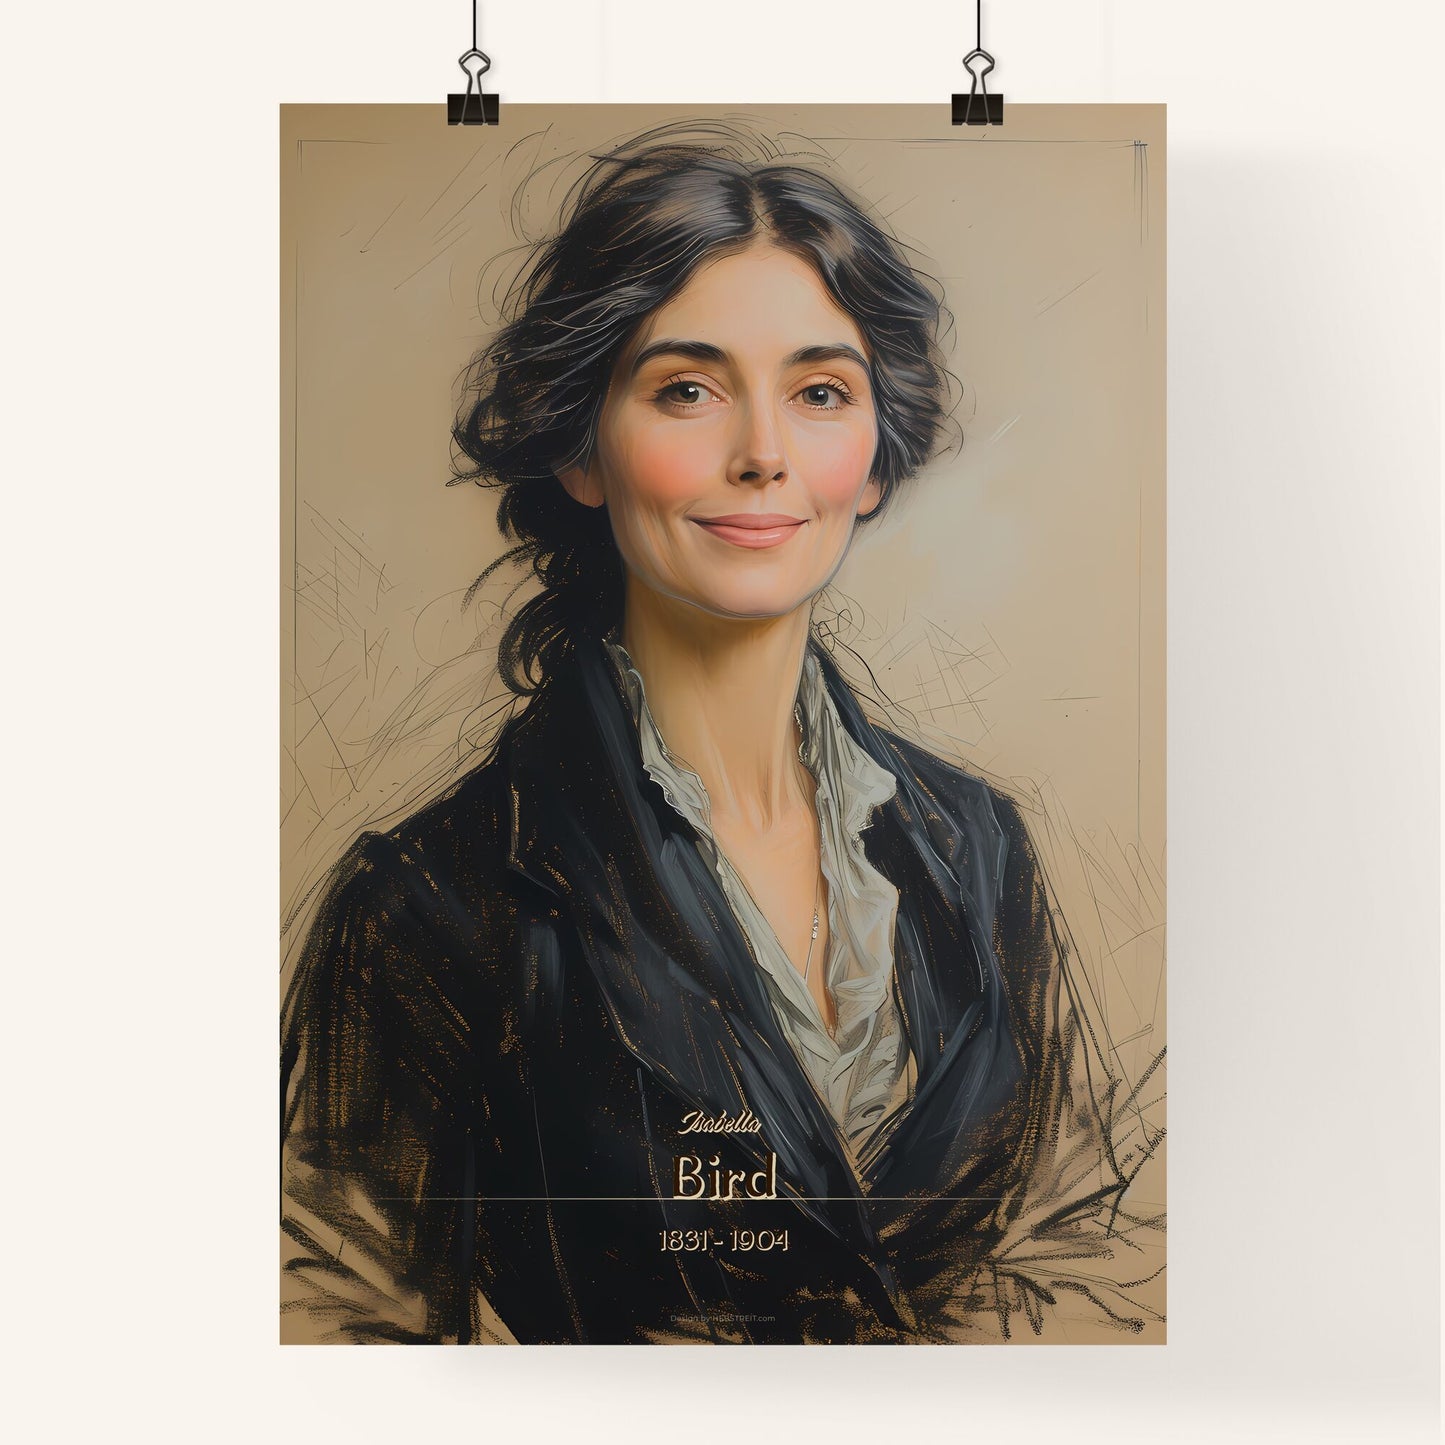 Isabella, Bird, 1831 - 1904, A Poster of a woman in a suit Default Title